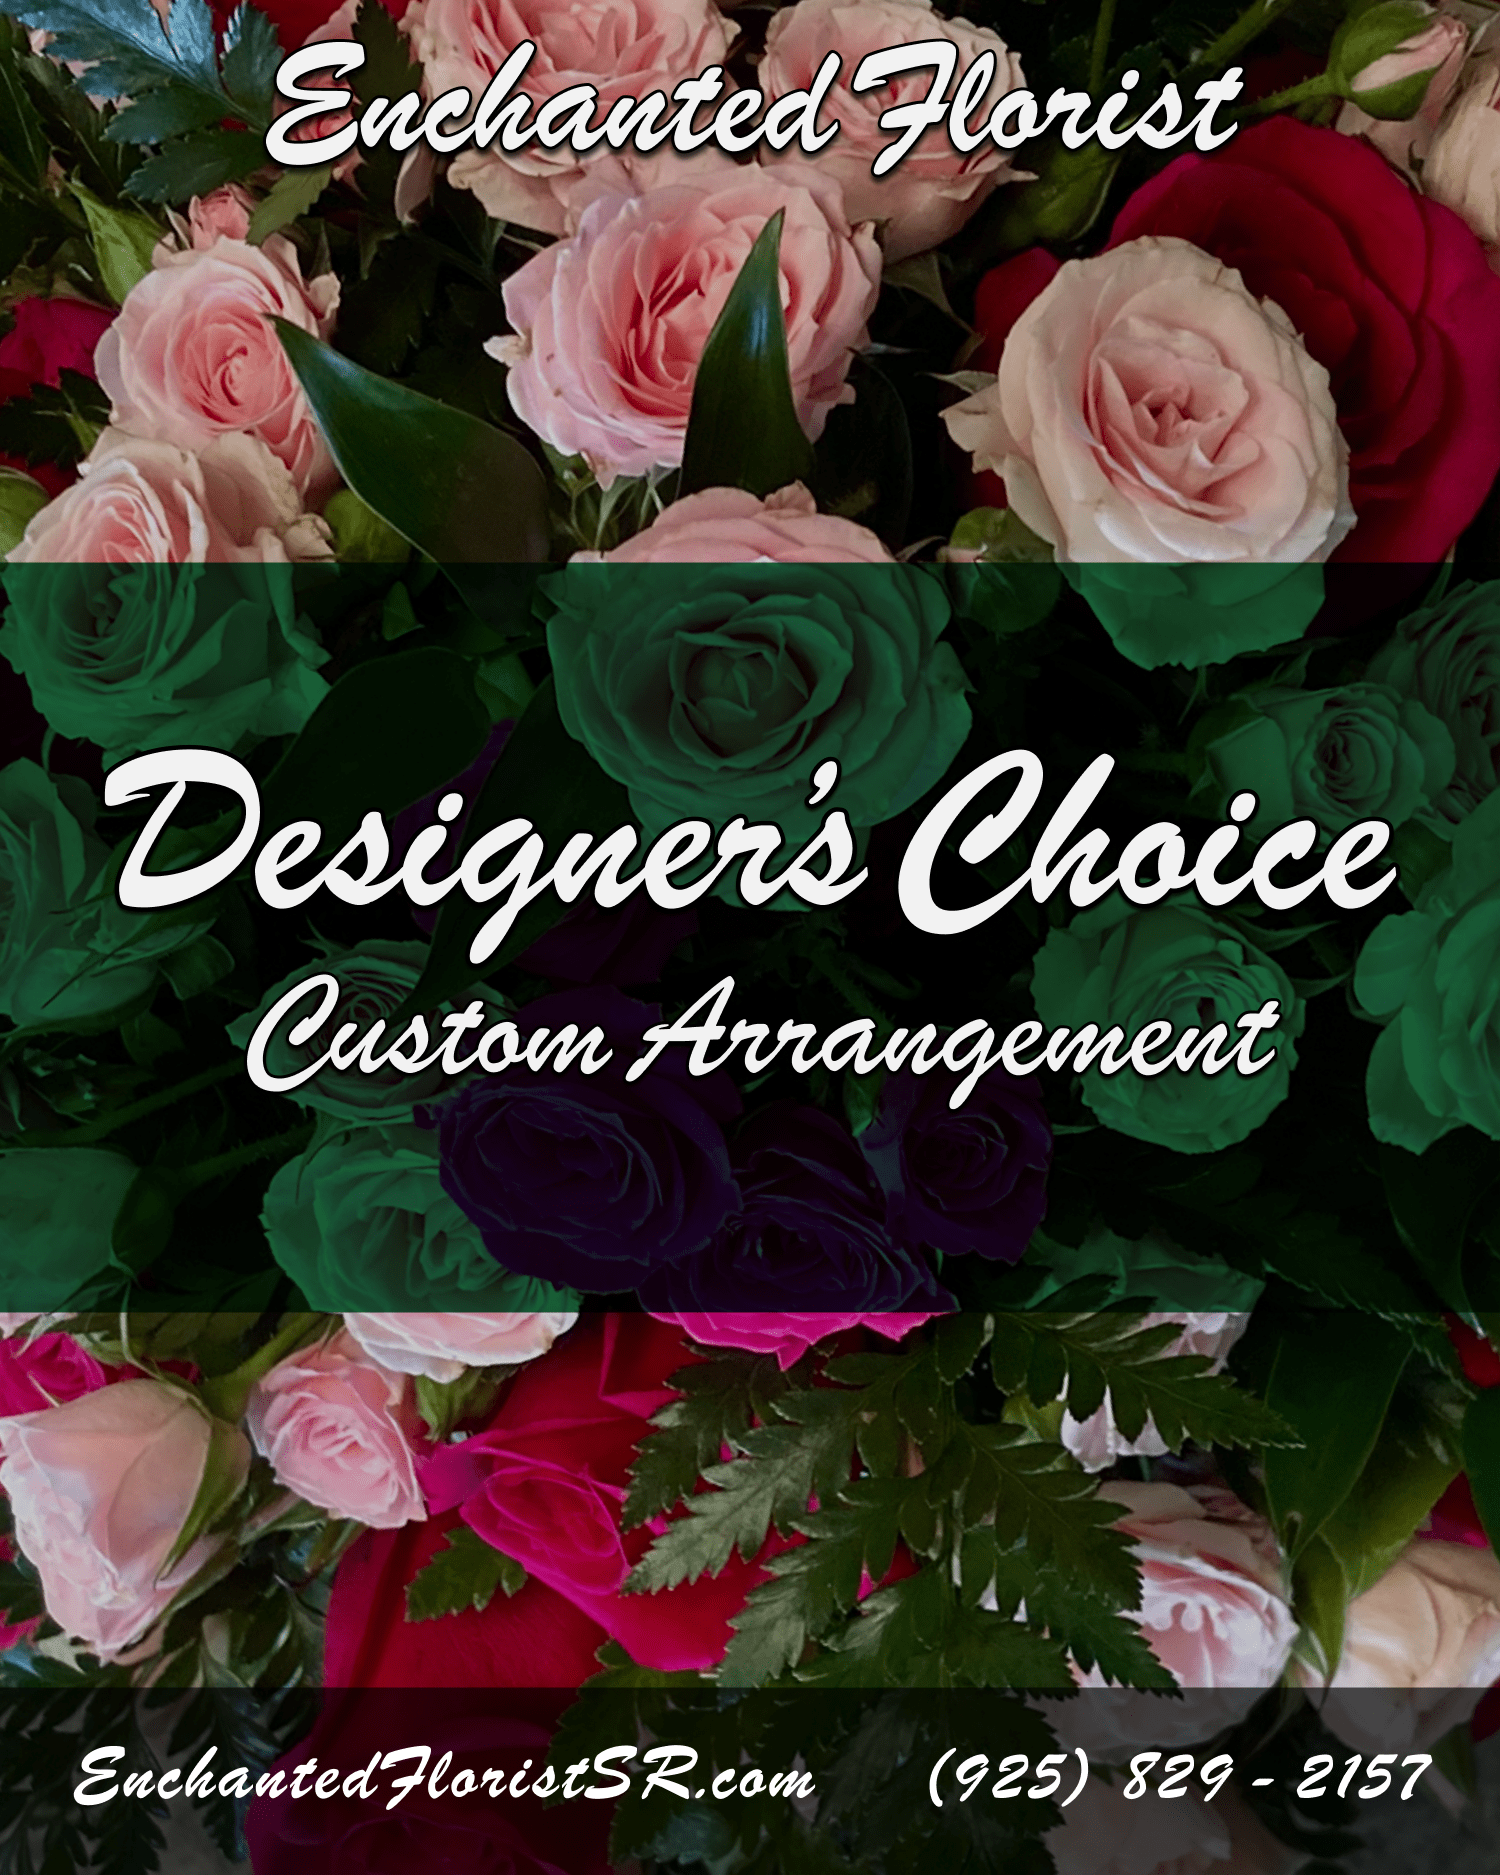 Designer's Choice - Leave the floral design to the experts. Choose your price-point and our talented florists will create a beautiful arrangement that everyone will be sure to love! Please give us a call if you'd like a different price than the three shown: (925) 829-2157